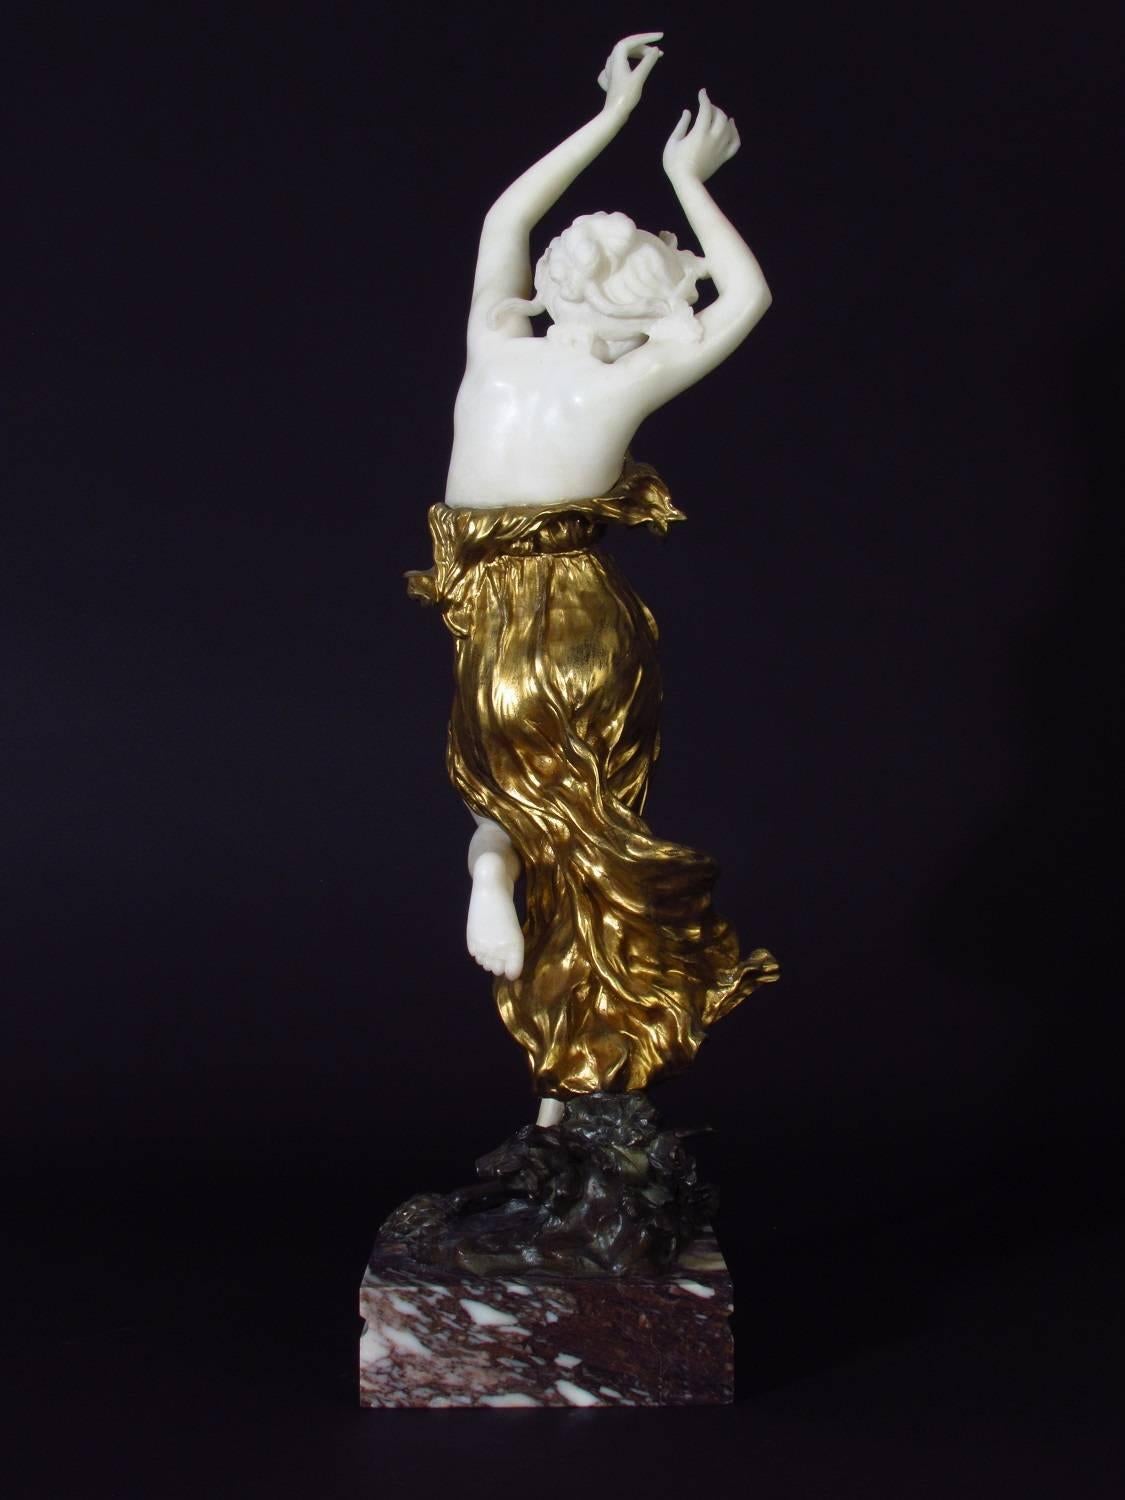 Dancer by Affortunato Gory 

Gilt bronze and white marble figure of a young dancer on a marble base.

Signed: Gory     Foundry pastille: LNJL

Affortunato Gory was an italian sculptor and studied at the Accademia di Belle Arti in Florence. As a